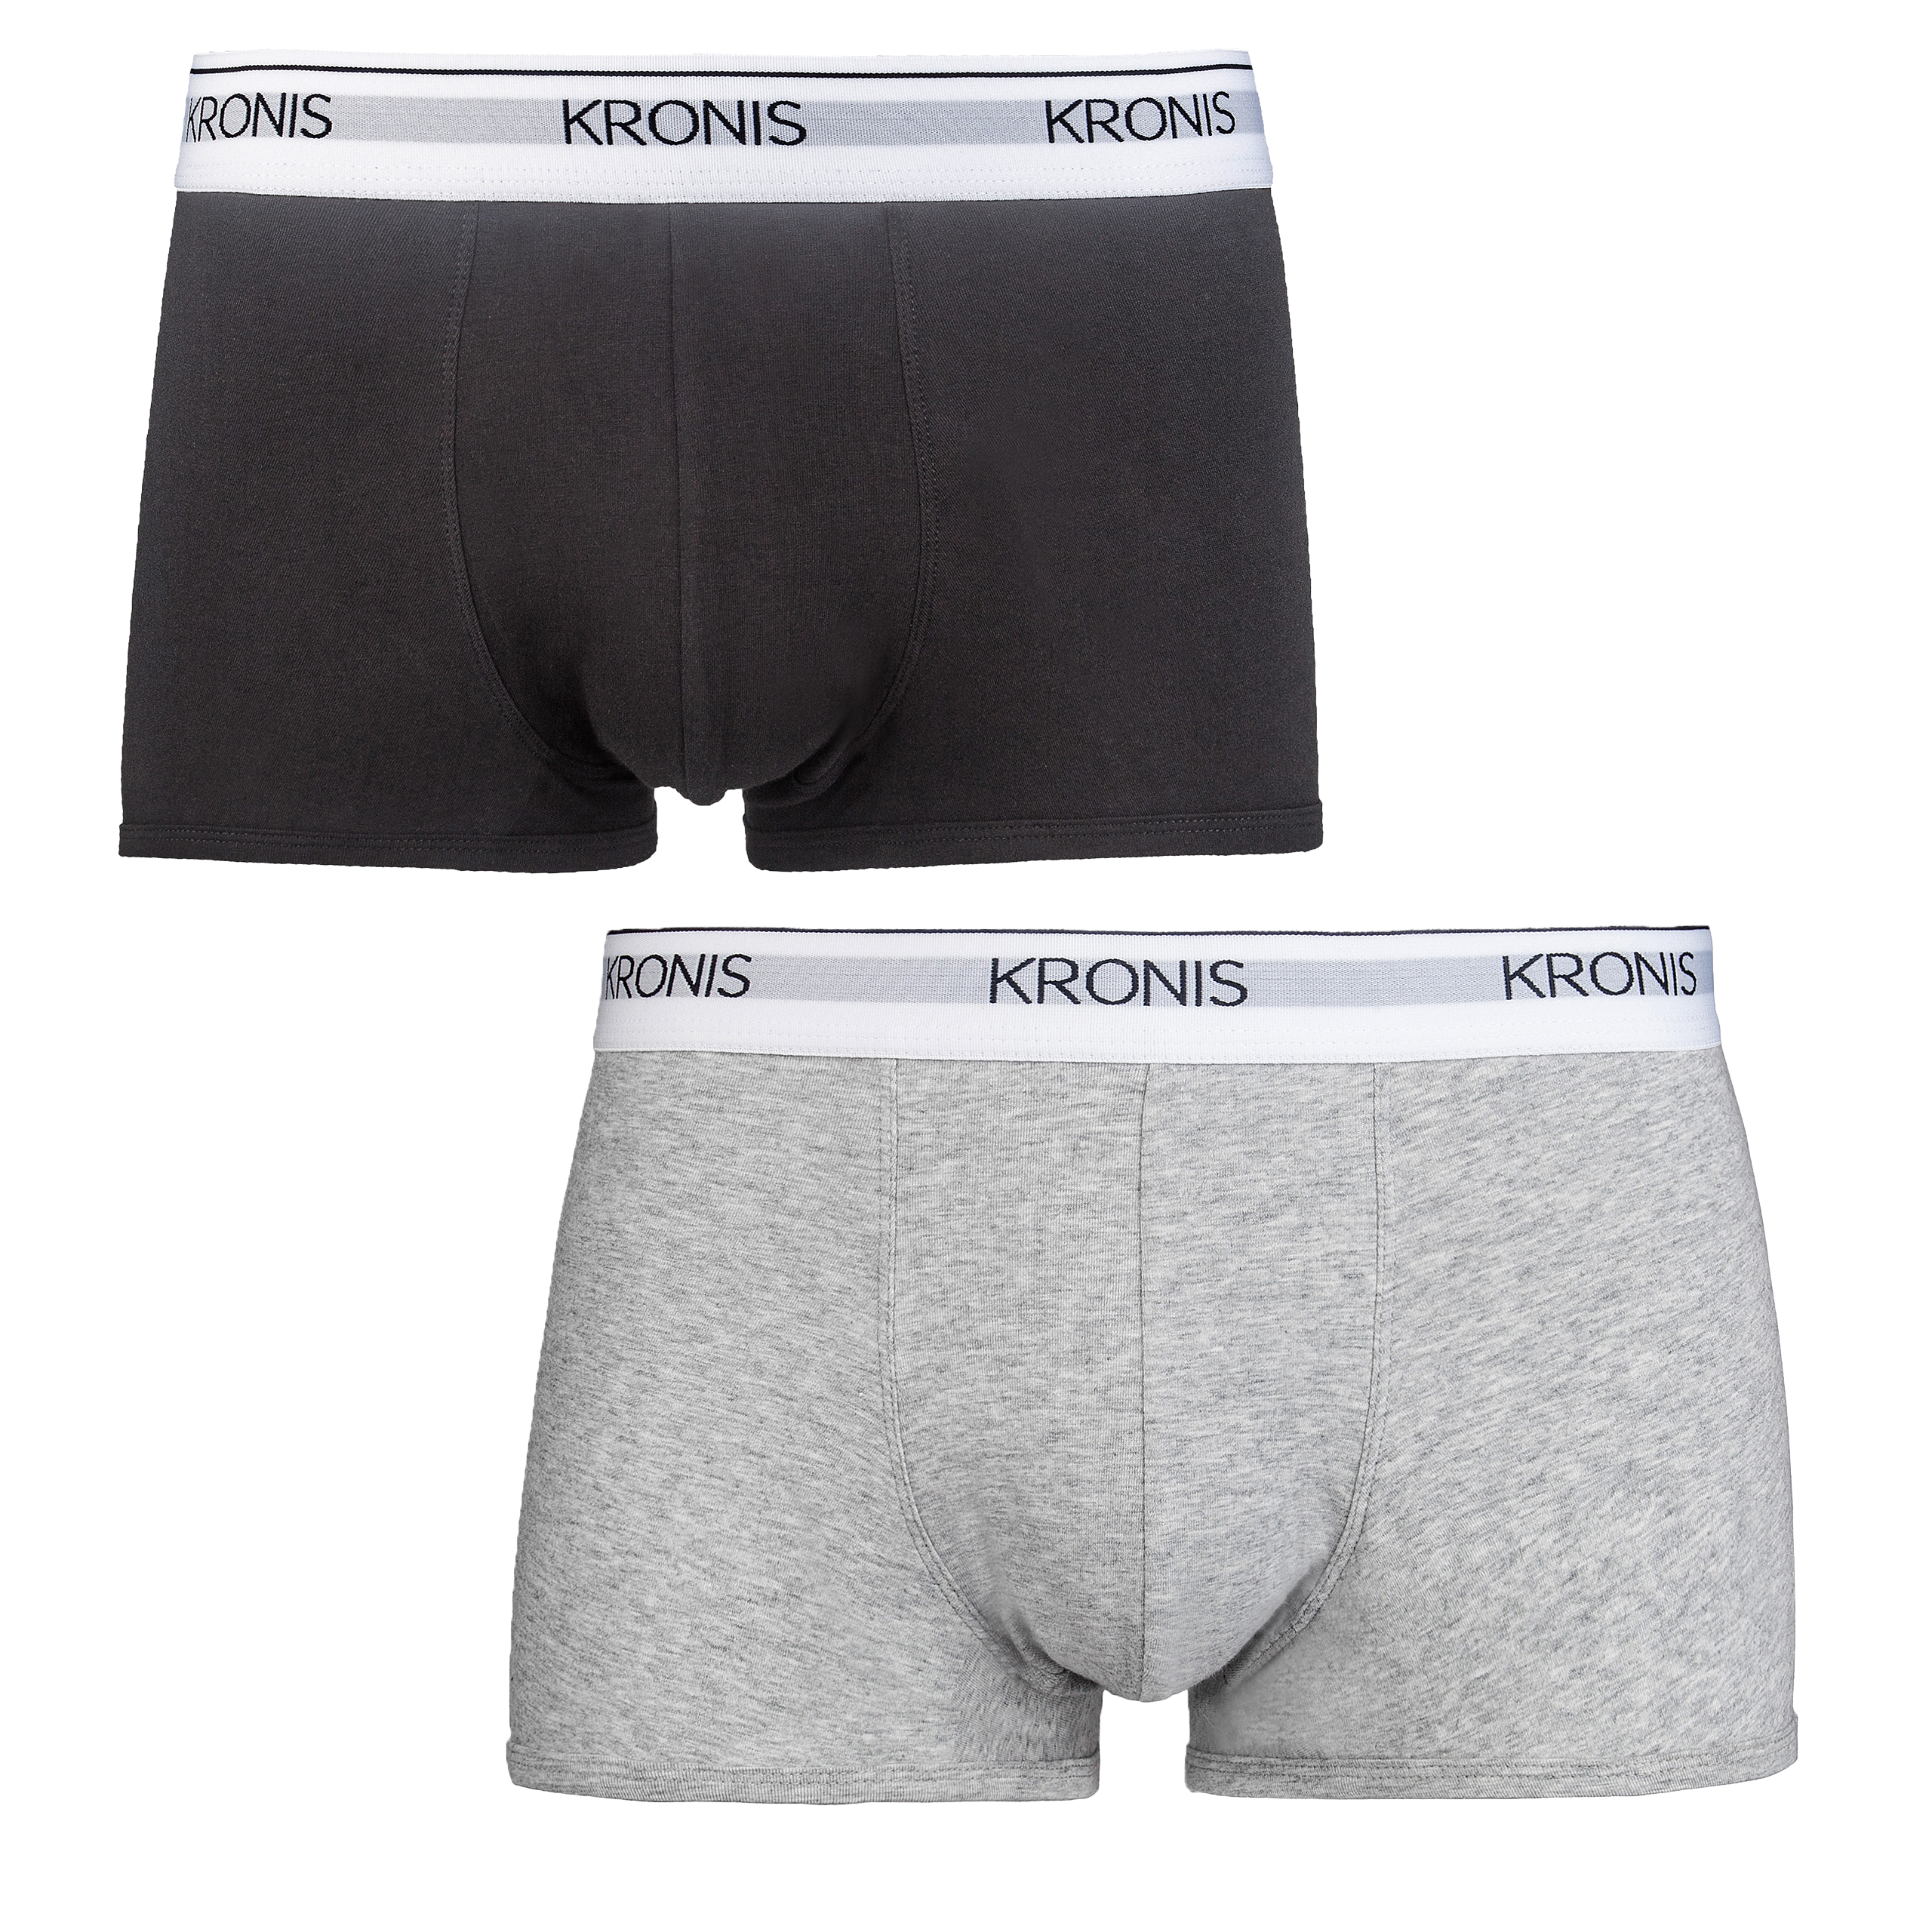 KRONIS Low Rise Trunks - Red + Blue – KRONIS Trunks